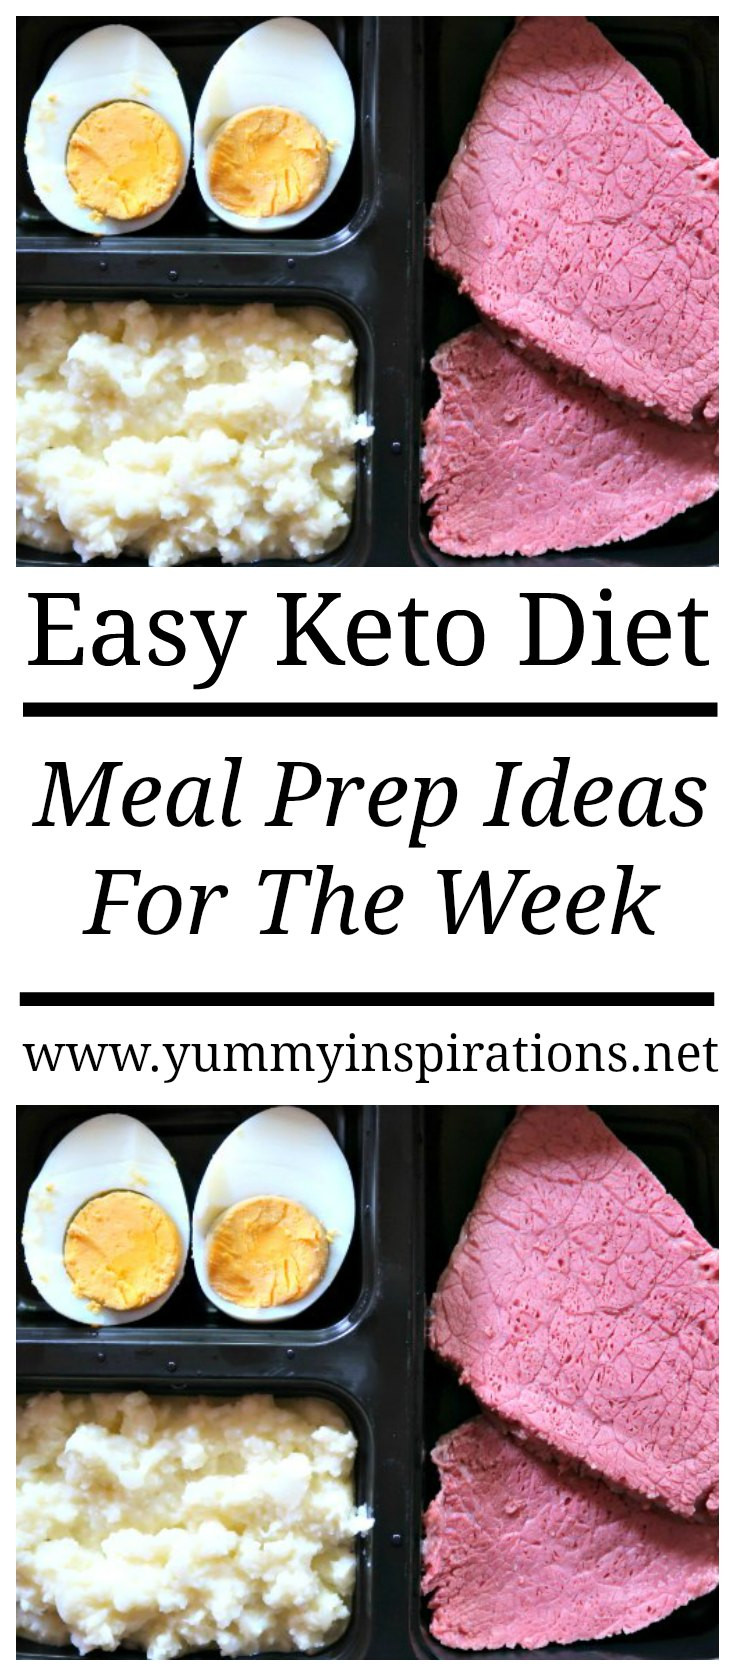 Keto Dinner Meal Prep For The Week
 Keto Meal Prep Ideas For The Week Easy Sunday Low Carb